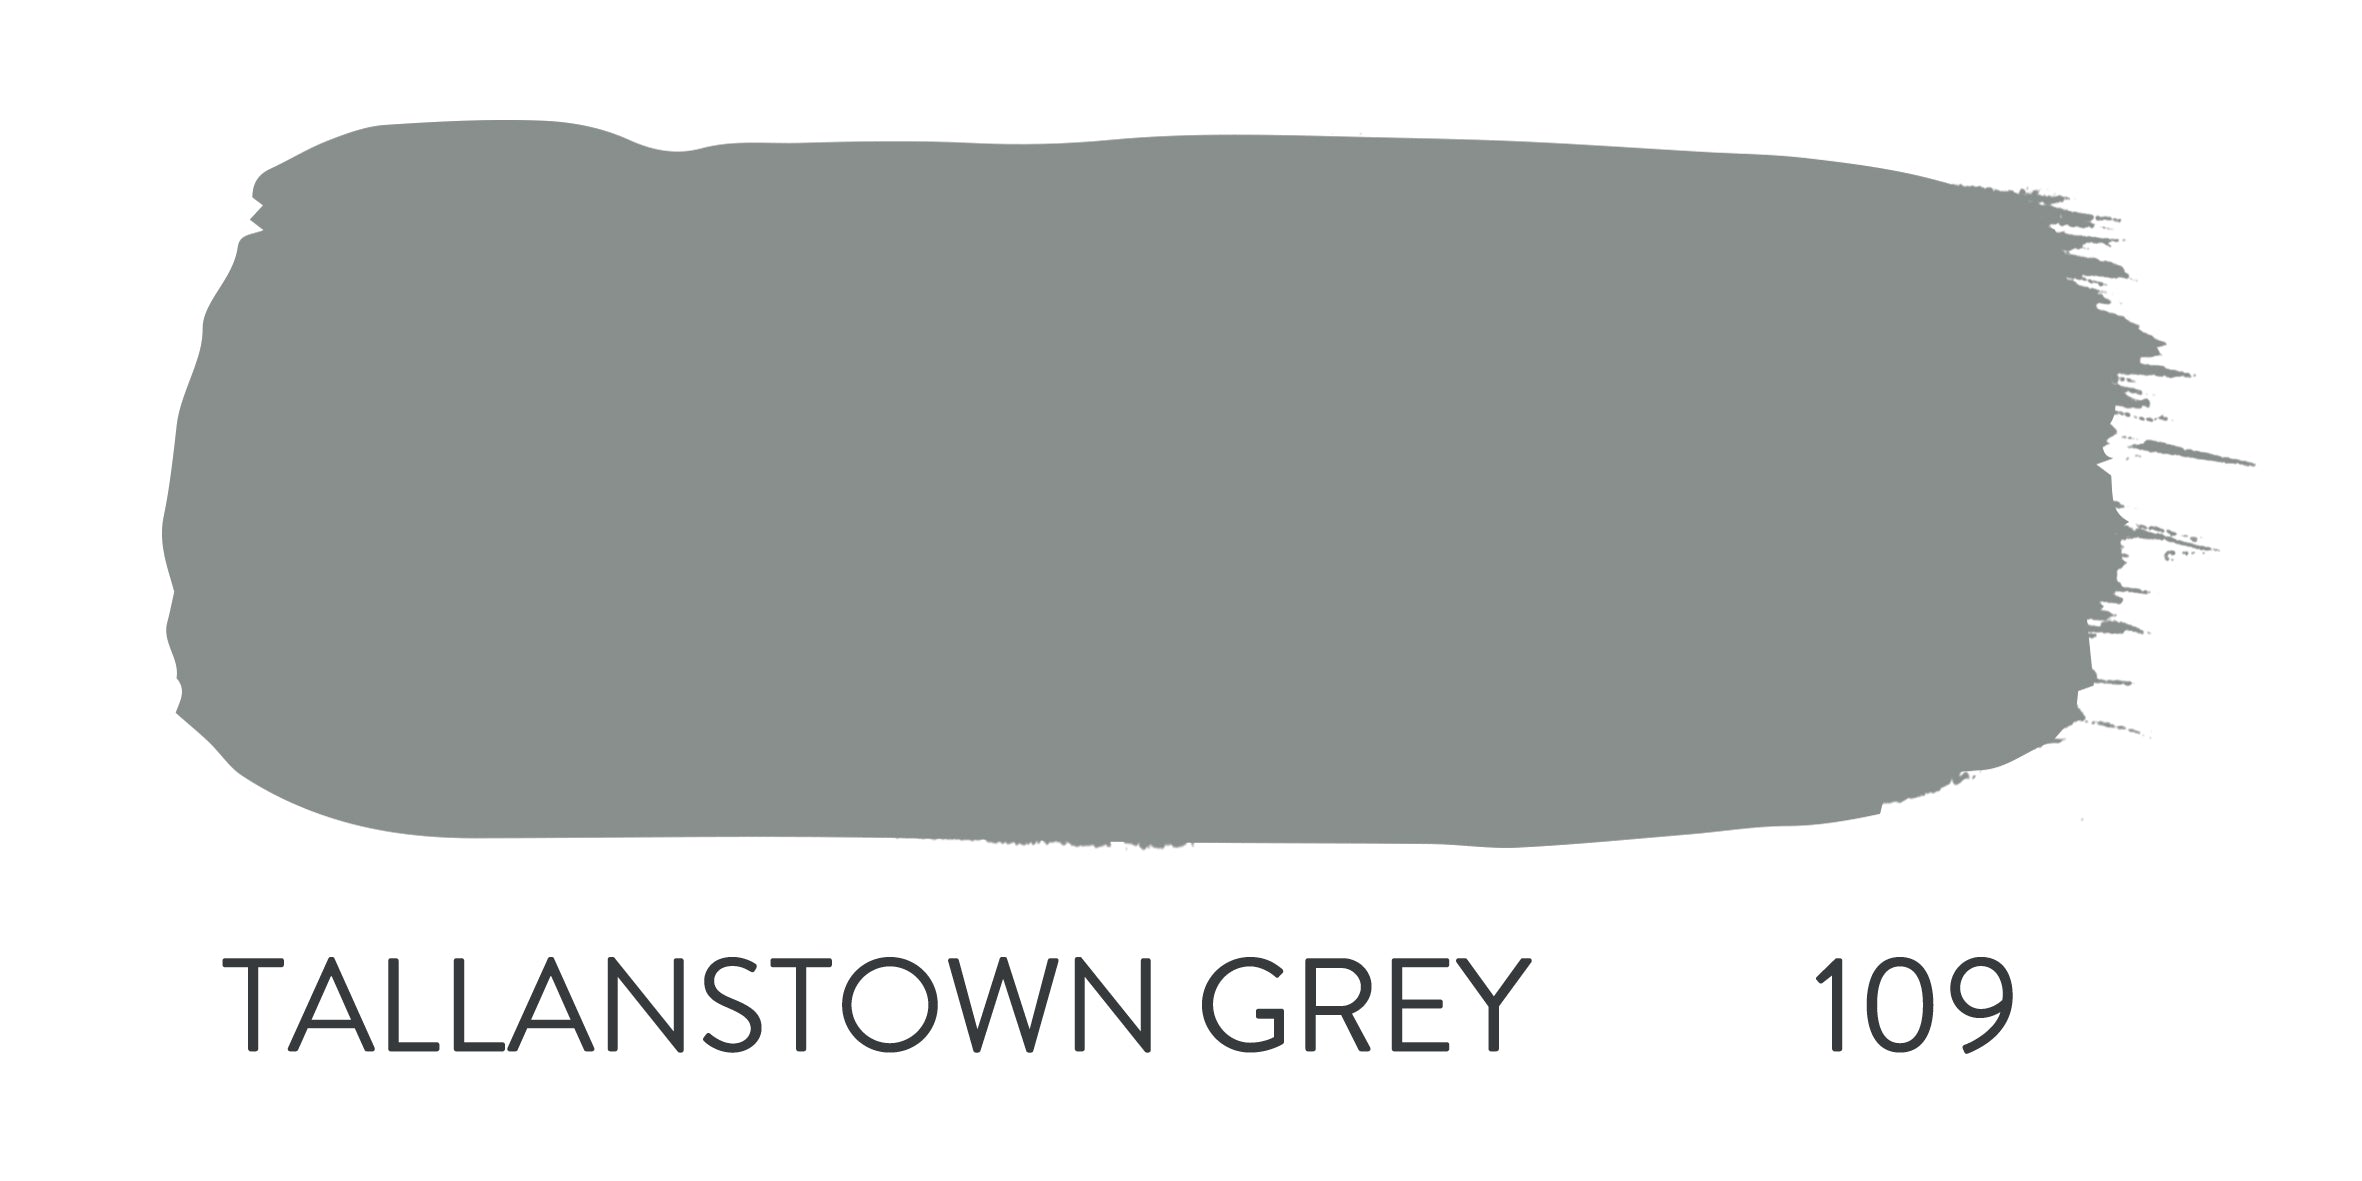 Paint Library Pure Flat Emulsion 125 ml. Sample TALLANSTOWN GREY 109